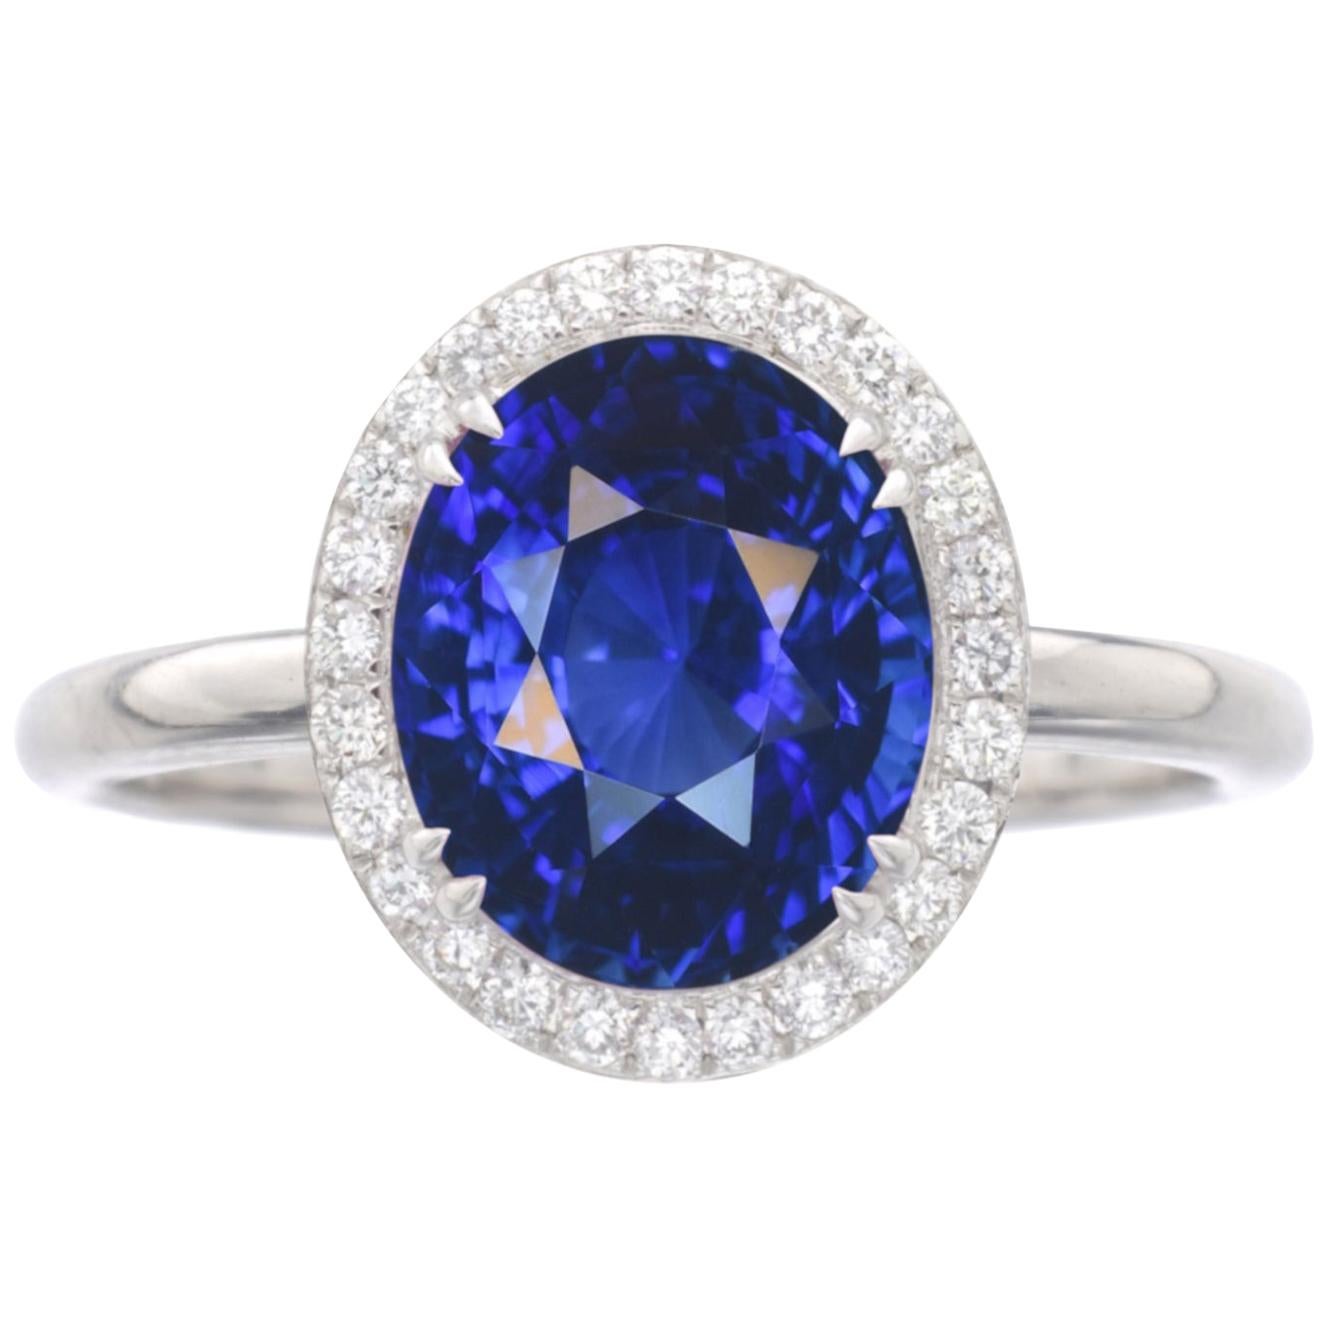 Flawless Clarity GRS GIA Certified 5.76 Carat Natural Sapphire Ring